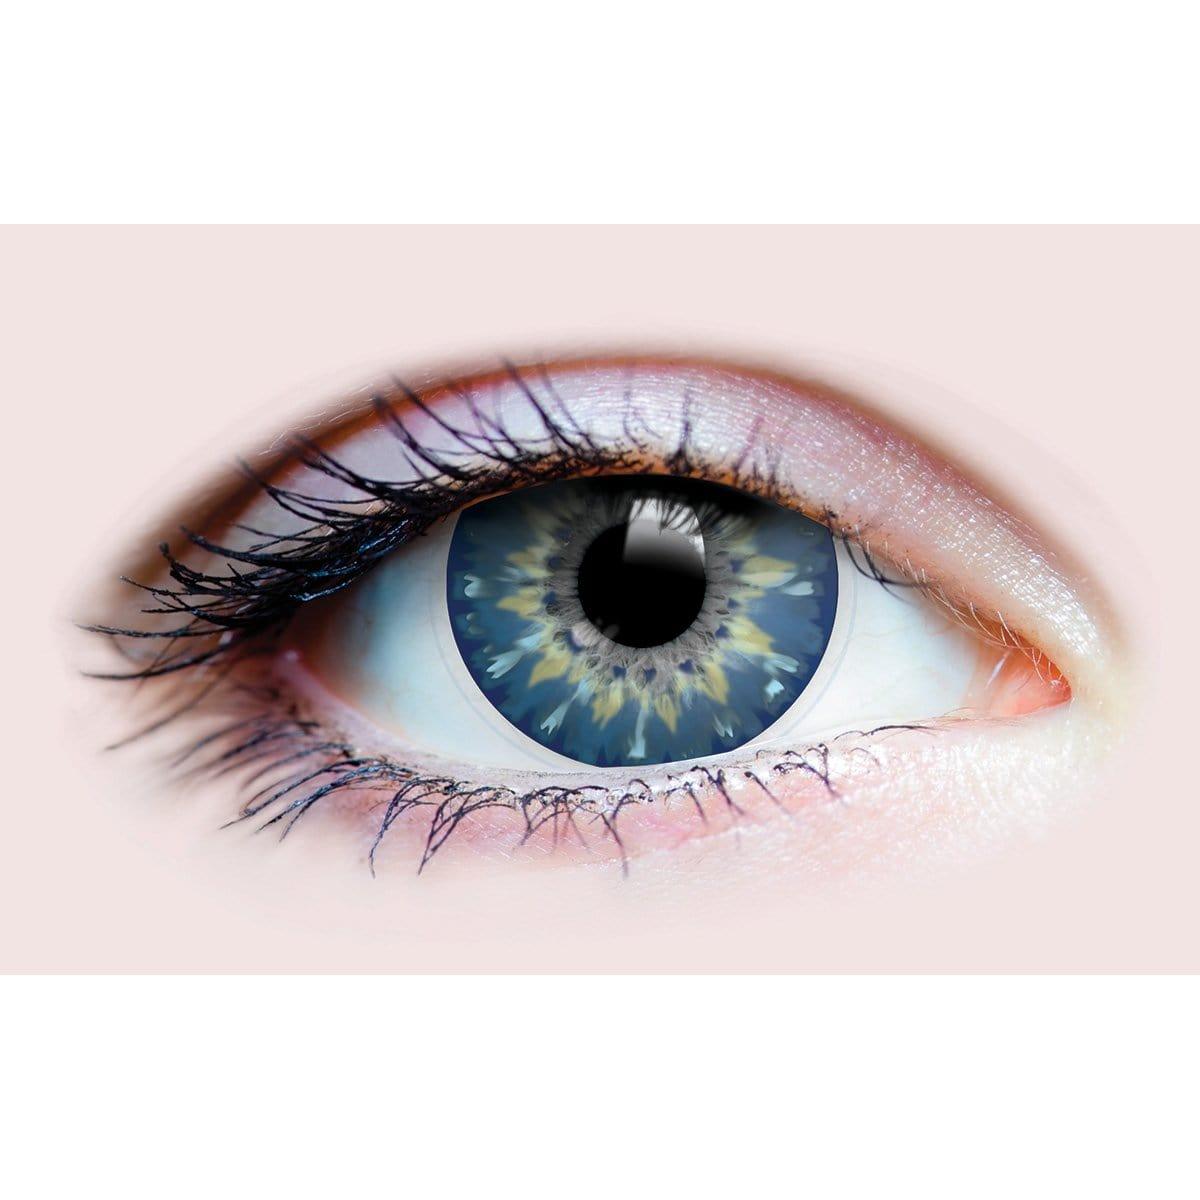 Buy Costume Accessories Etherial sapphire contact lenses, 3 months usage sold at Party Expert